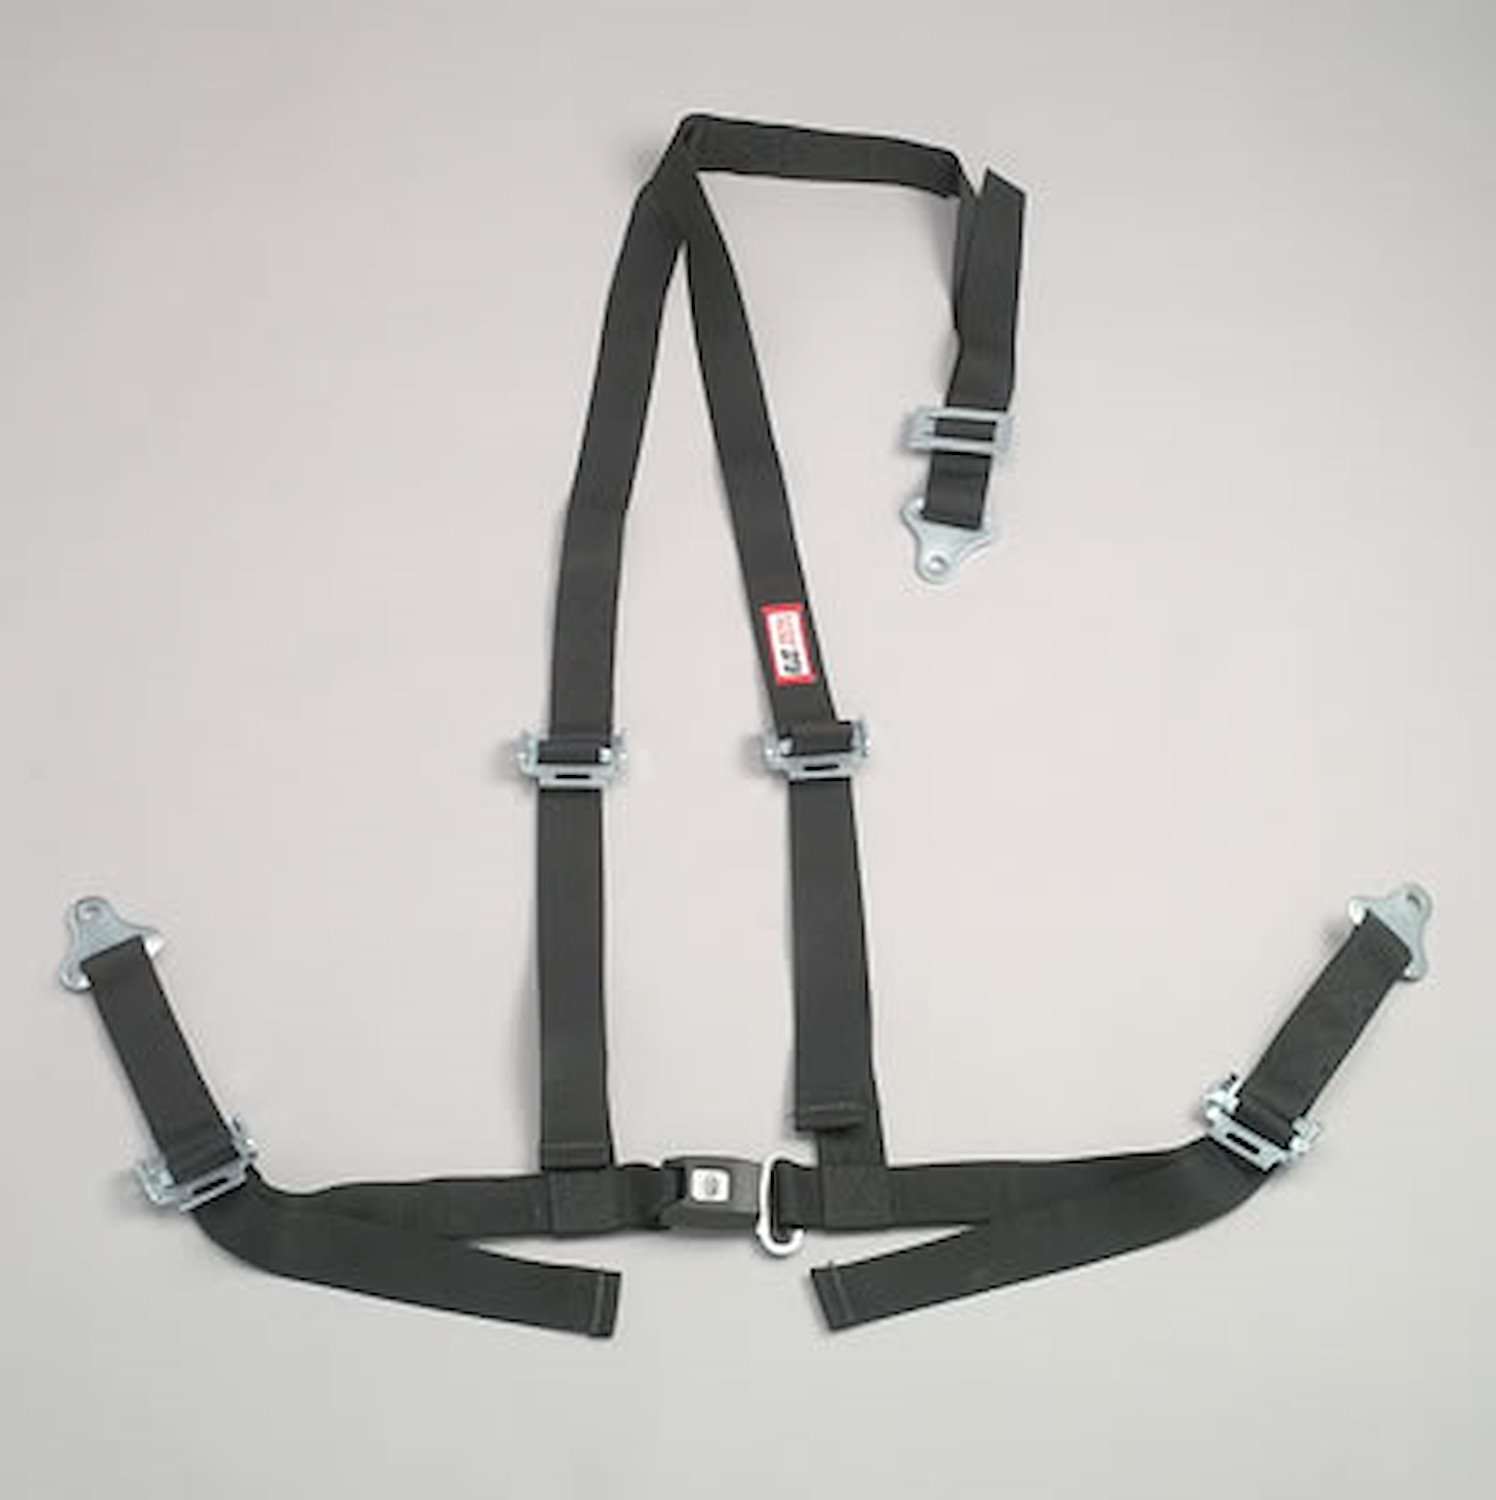 NON-SFI B&T HARNESS 2 PULL UP Lap Belt 2 S. H. V ROLL BAR Mount ALL WRAP ENDS BLACK